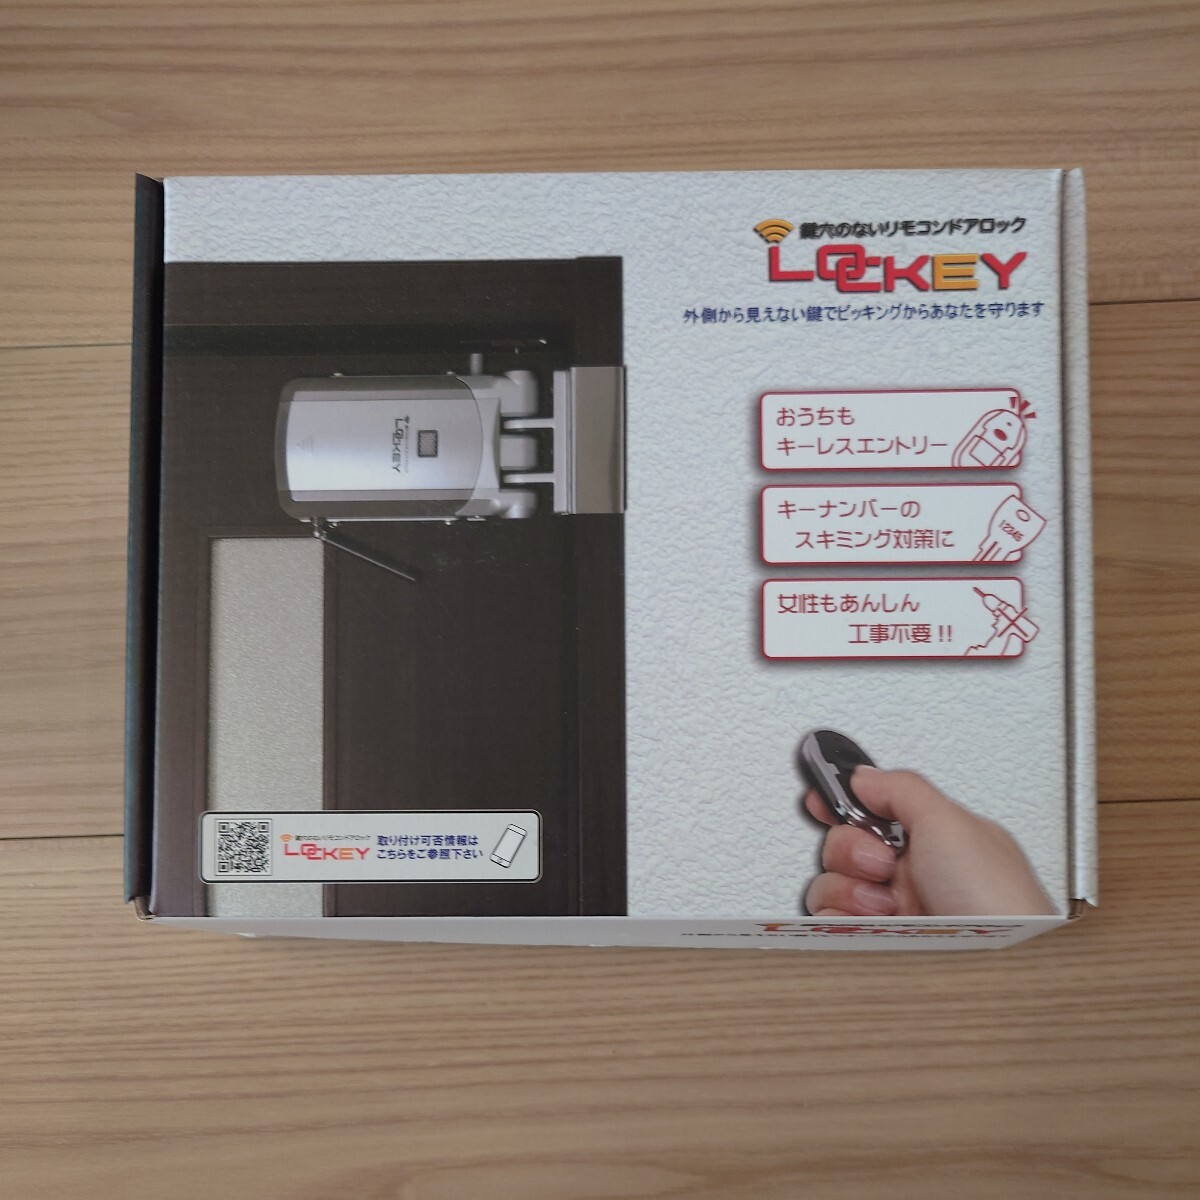  key hole. not remote control door lock LOCKEY Rocky accessory all equipped 